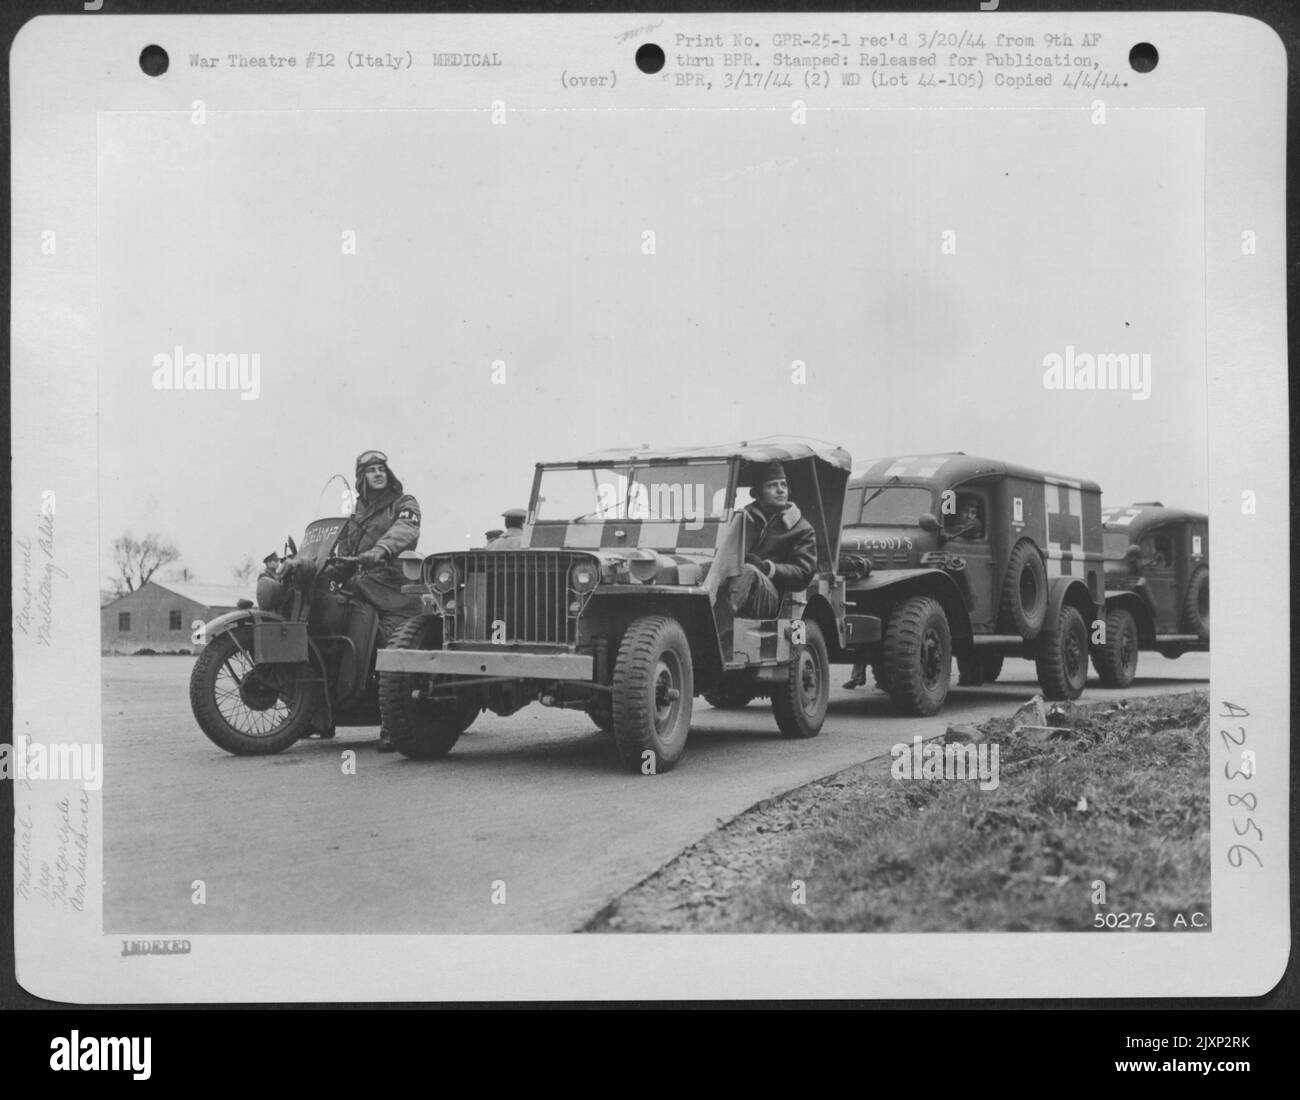 Paced by a motorcycle policeman and jeep equipped with two way radio, ambulance of a 9th US Air Force evacuation unit await arrival of troop carrier aircraft which will relay soldier patients to general hospitals several hundred miles distant. The Stock Photo